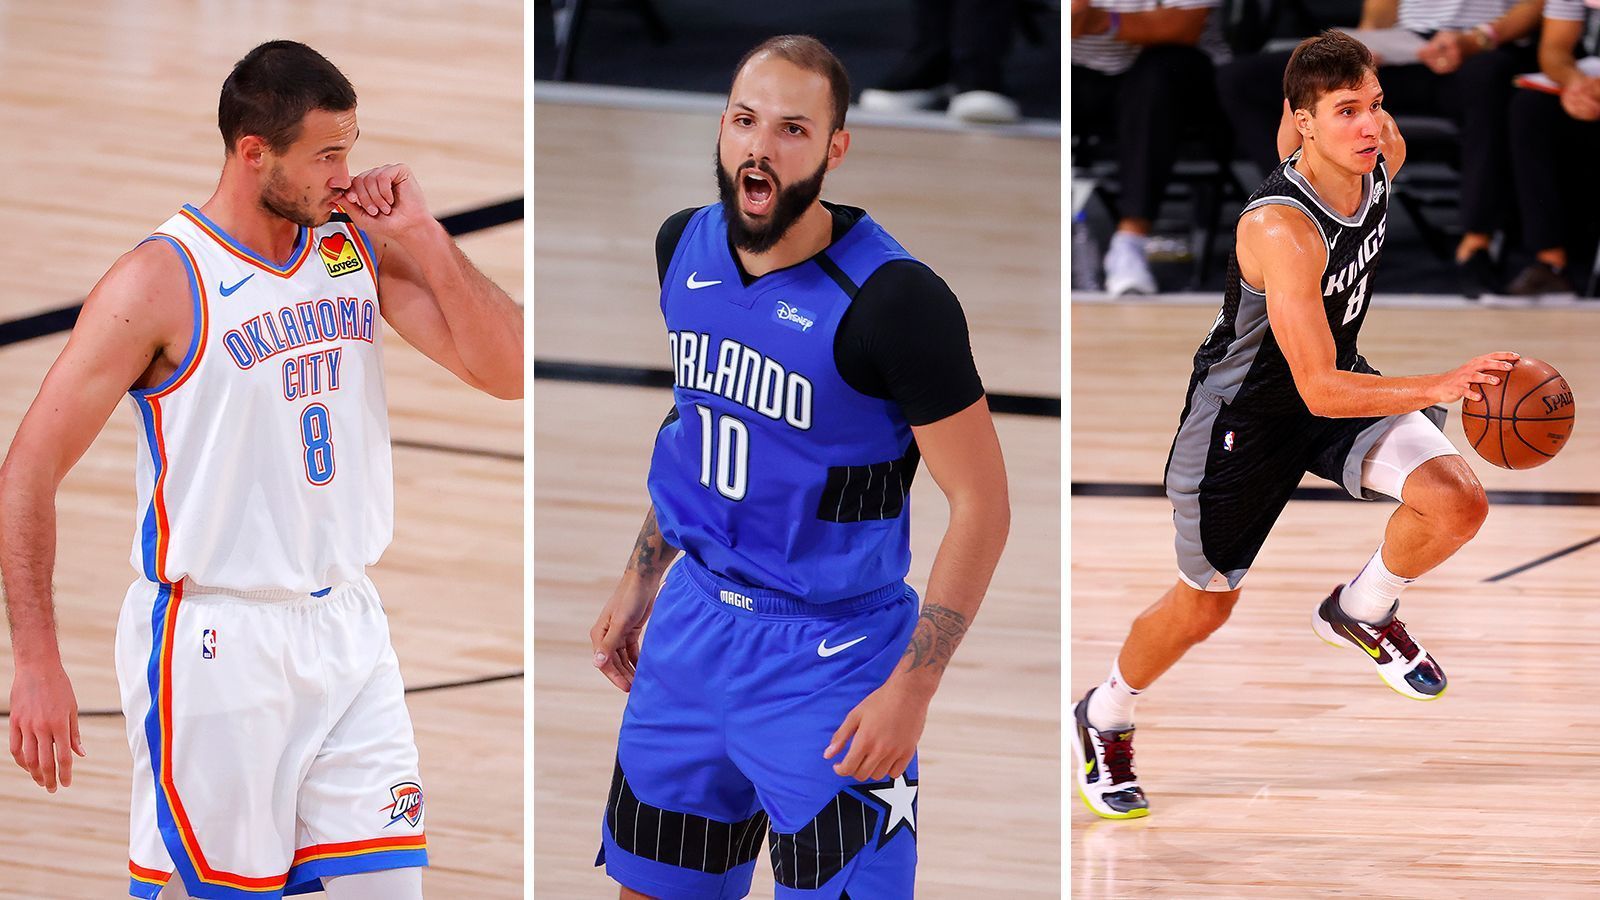 
                <strong>Weitere Top-Spieler in der Free Agency</strong><br>
                Danilo Gallinari (Oklahoma City Thunder, Unrestricted) - Evan Fournier (Orlando Magic, Players Option) - Bogdan Bogdanovic (Sacramento Kings, Restricted)
              